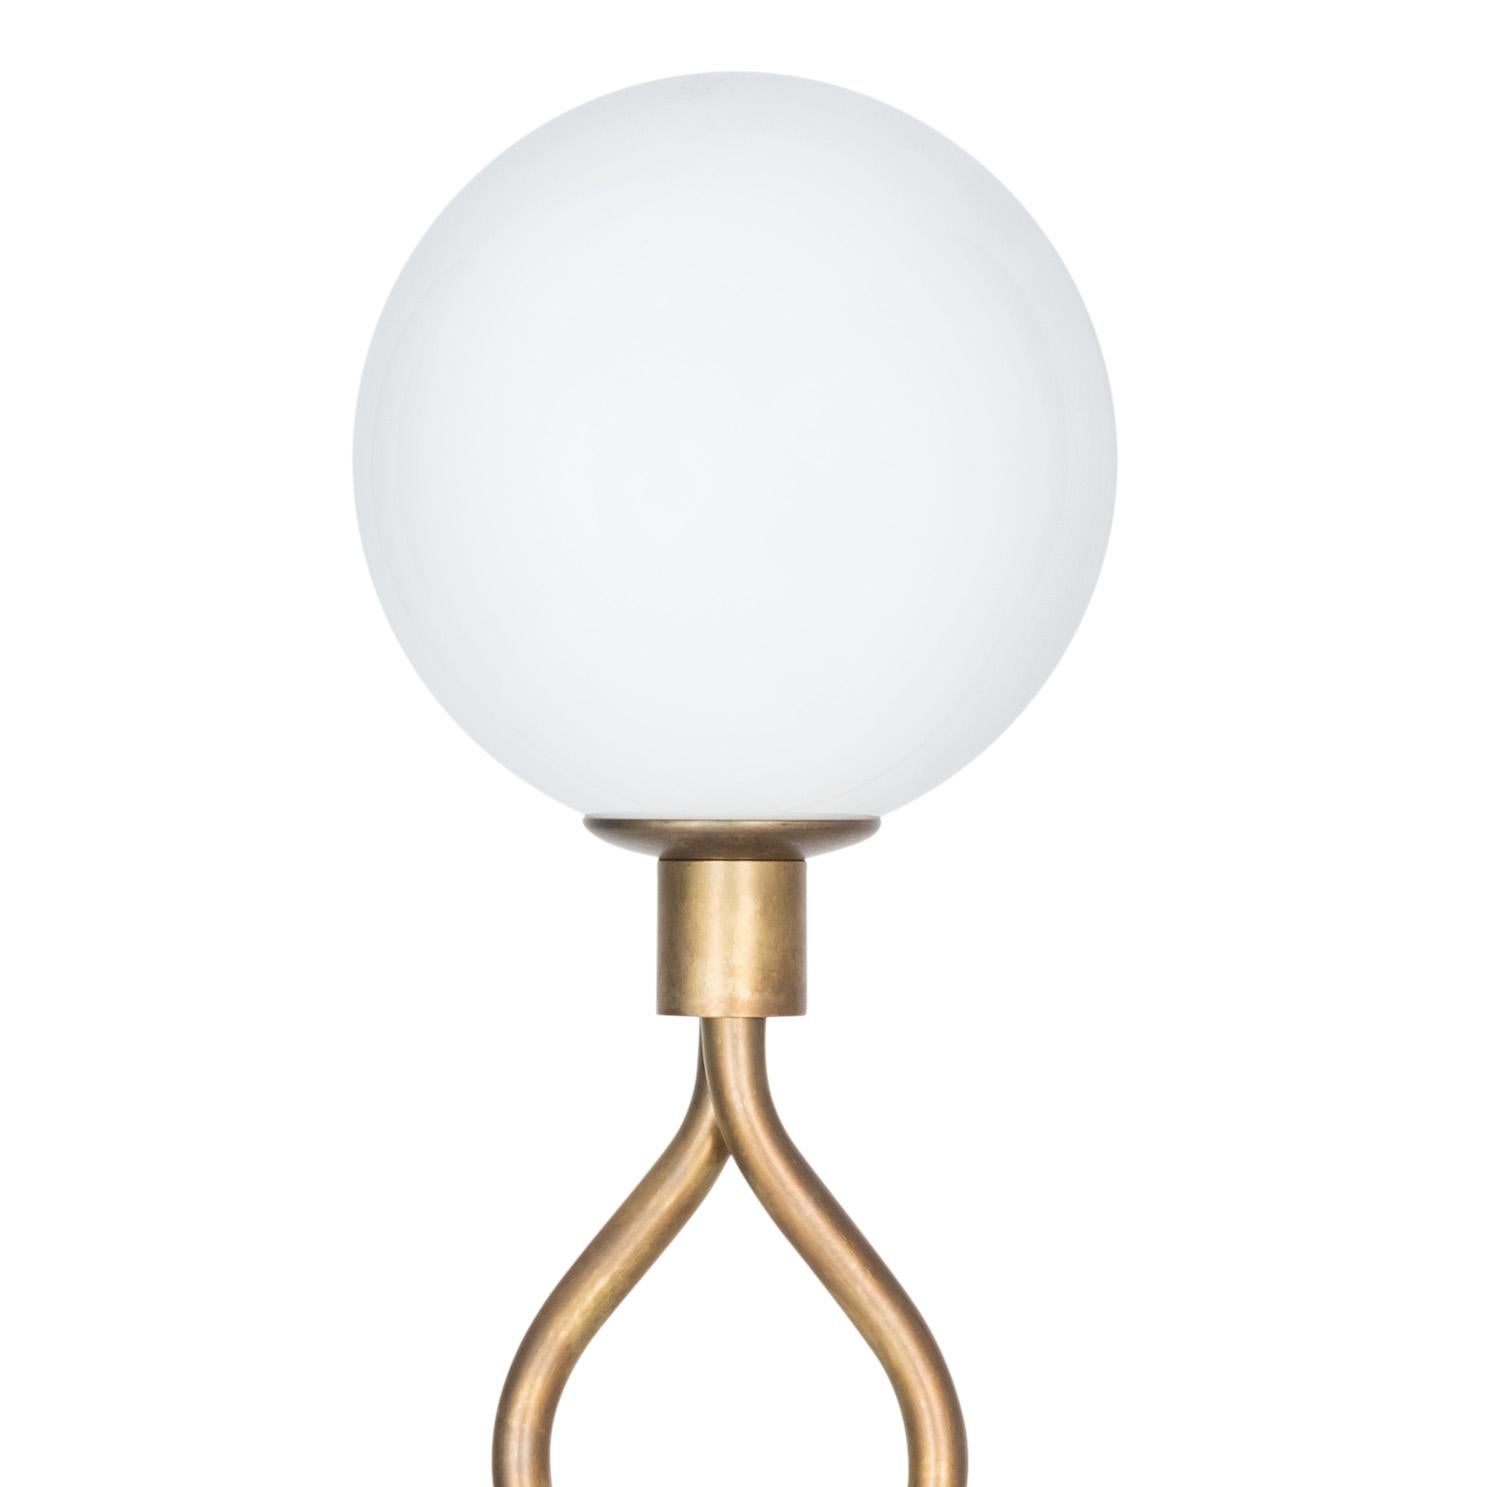 ELD
D. 160 mm
H. 500 mm
Max 10 W E14
1445-6 Raw brass/matte opal

The lamps are wiring with standard Europe wiring.

Fire Klot is a table lamp designed by Lisa Hilland. The elegant lamp is made of raw brass and has beautiful and decorative